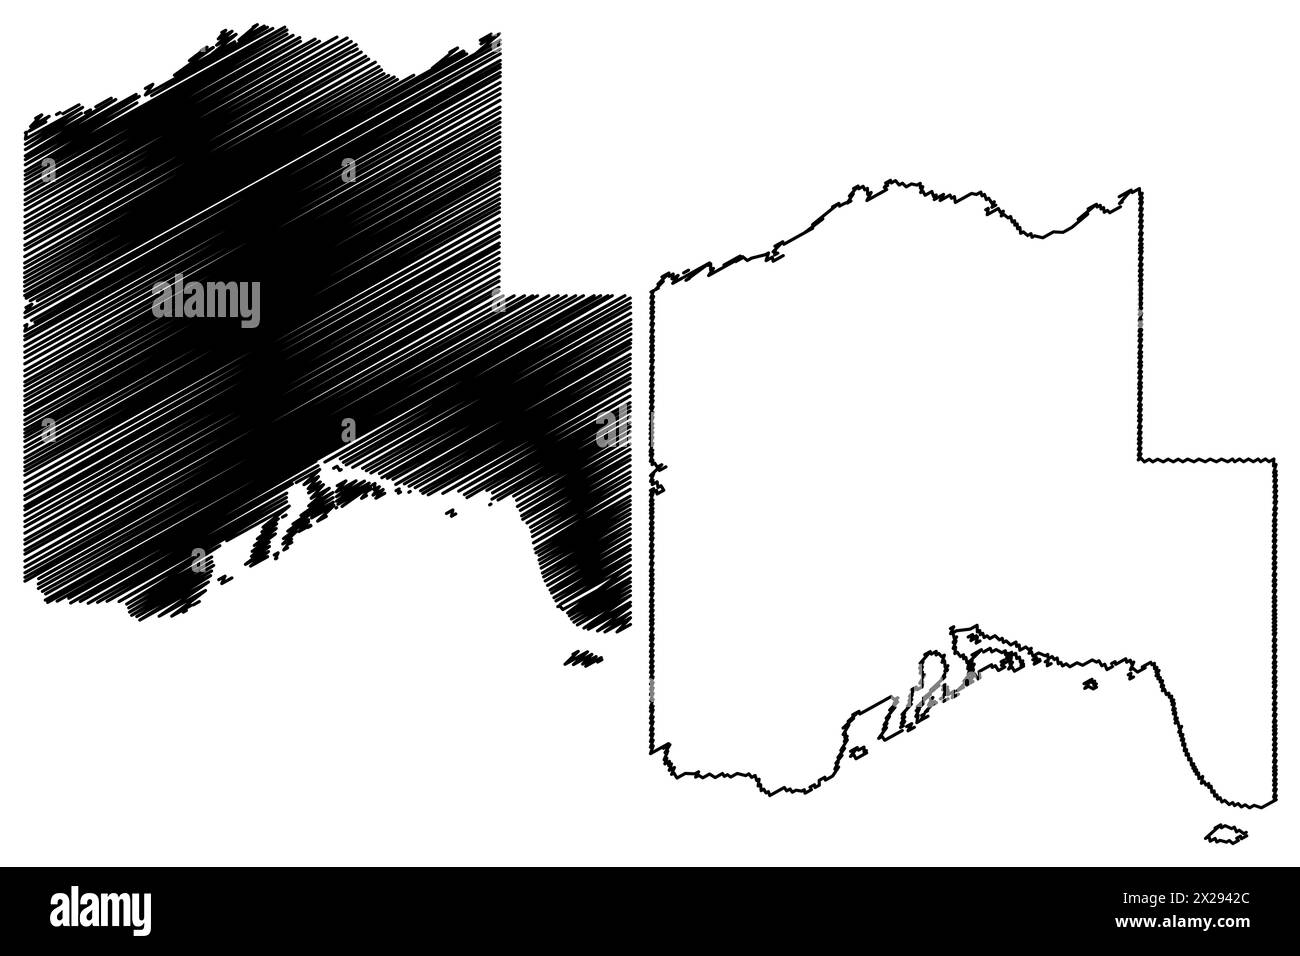 Thunder Bay District (Canada, Ontario Province, North America) map vector illustration, scribble sketch Thunder Bay map Stock Vector